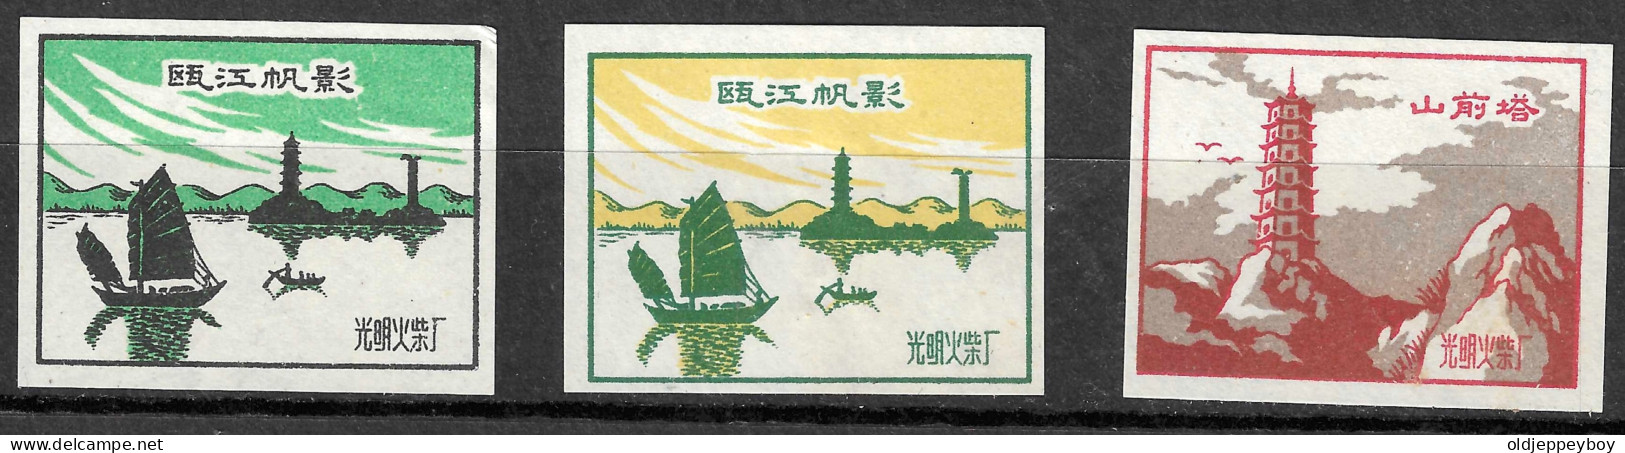 3 X CHINA MATCHBOX LABEL  OUJIANG SAILING SHADOW BRIGHT MATCH FACTORY,  PIEDMONT TOWER  - Boites D'allumettes - Etiquettes